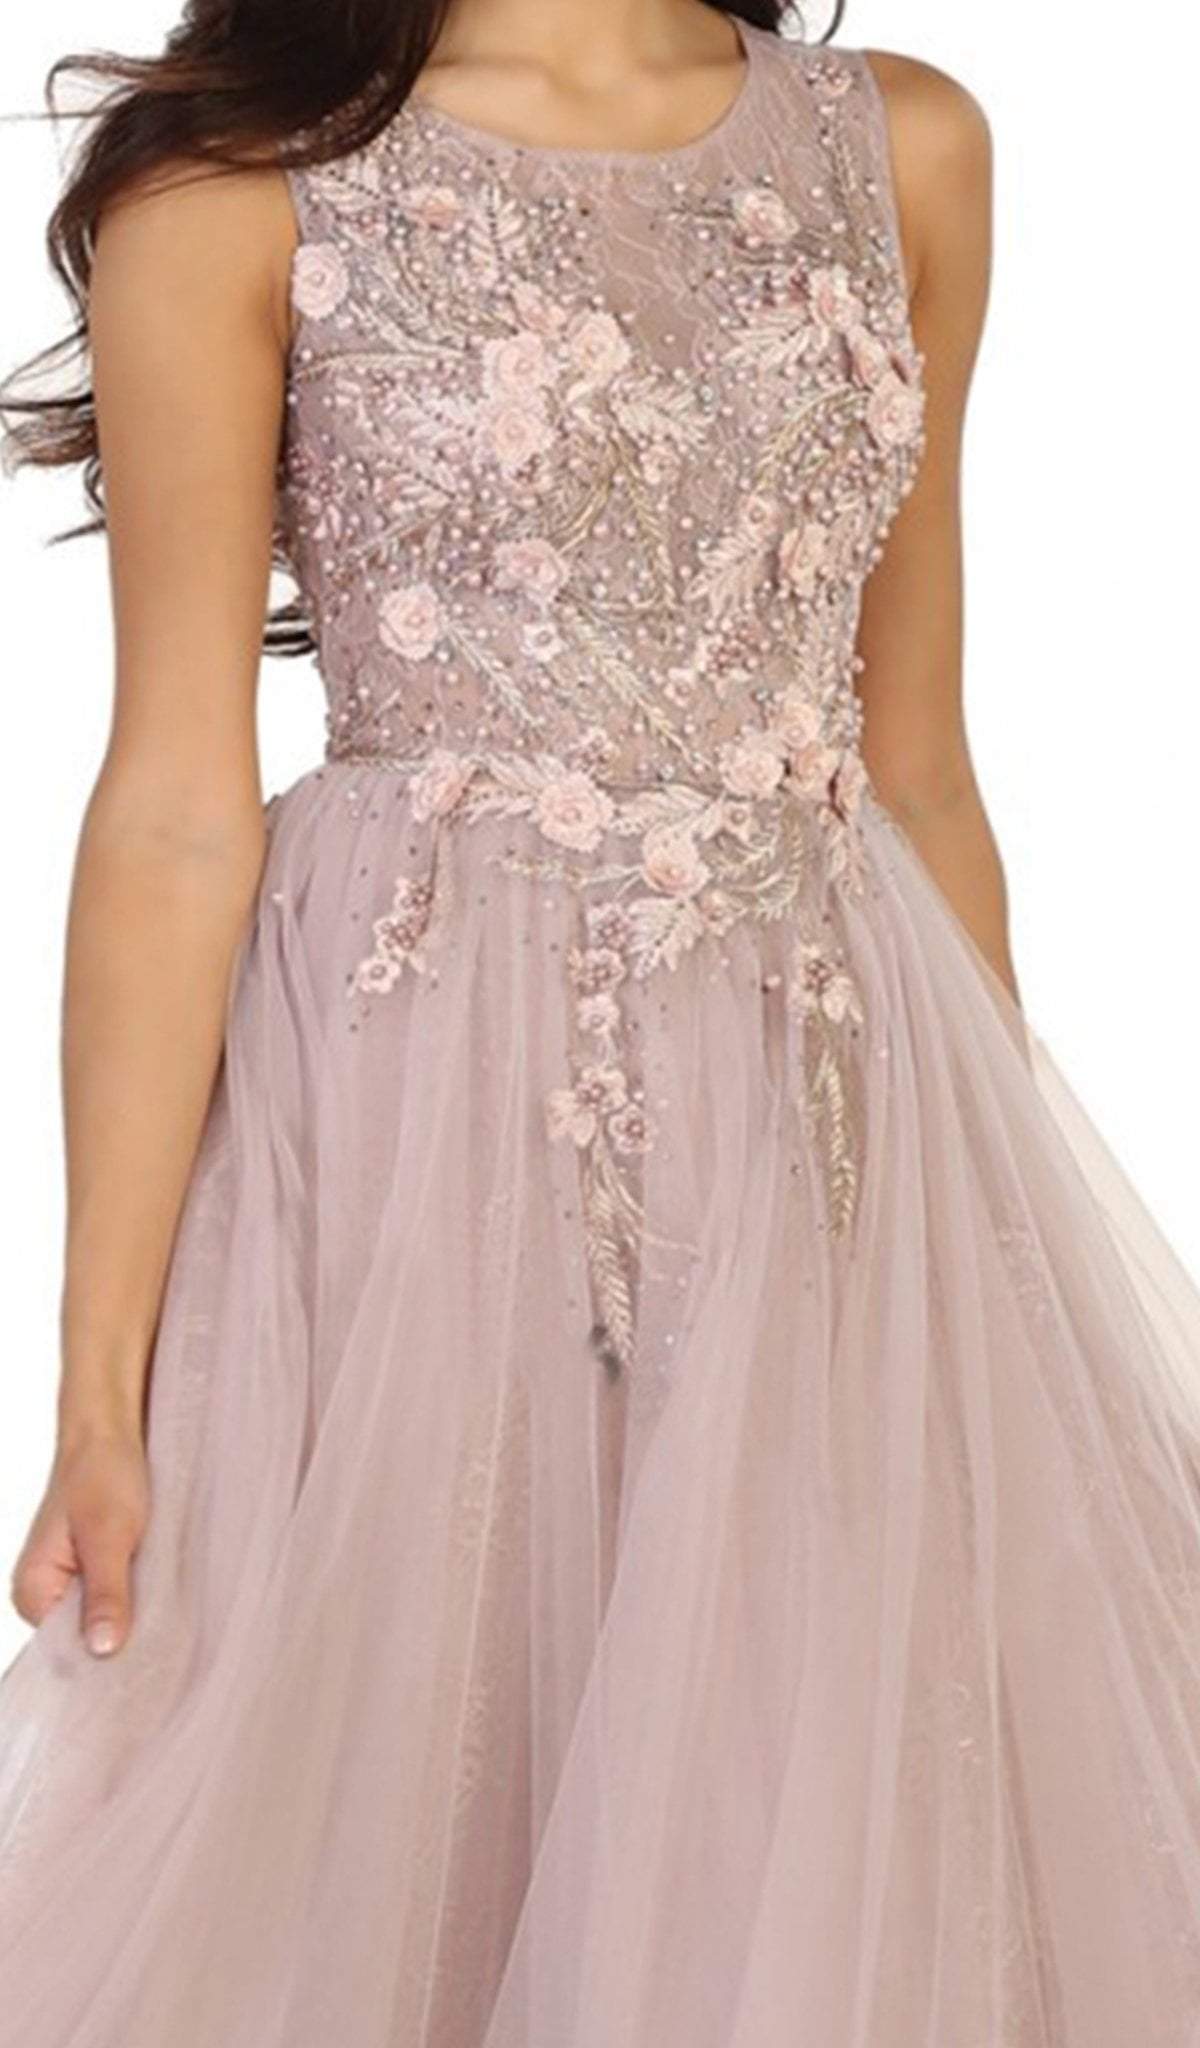 May Queen - RQ7527 Sleeveless Pearl Embellished Evening Gown Ball Gowns